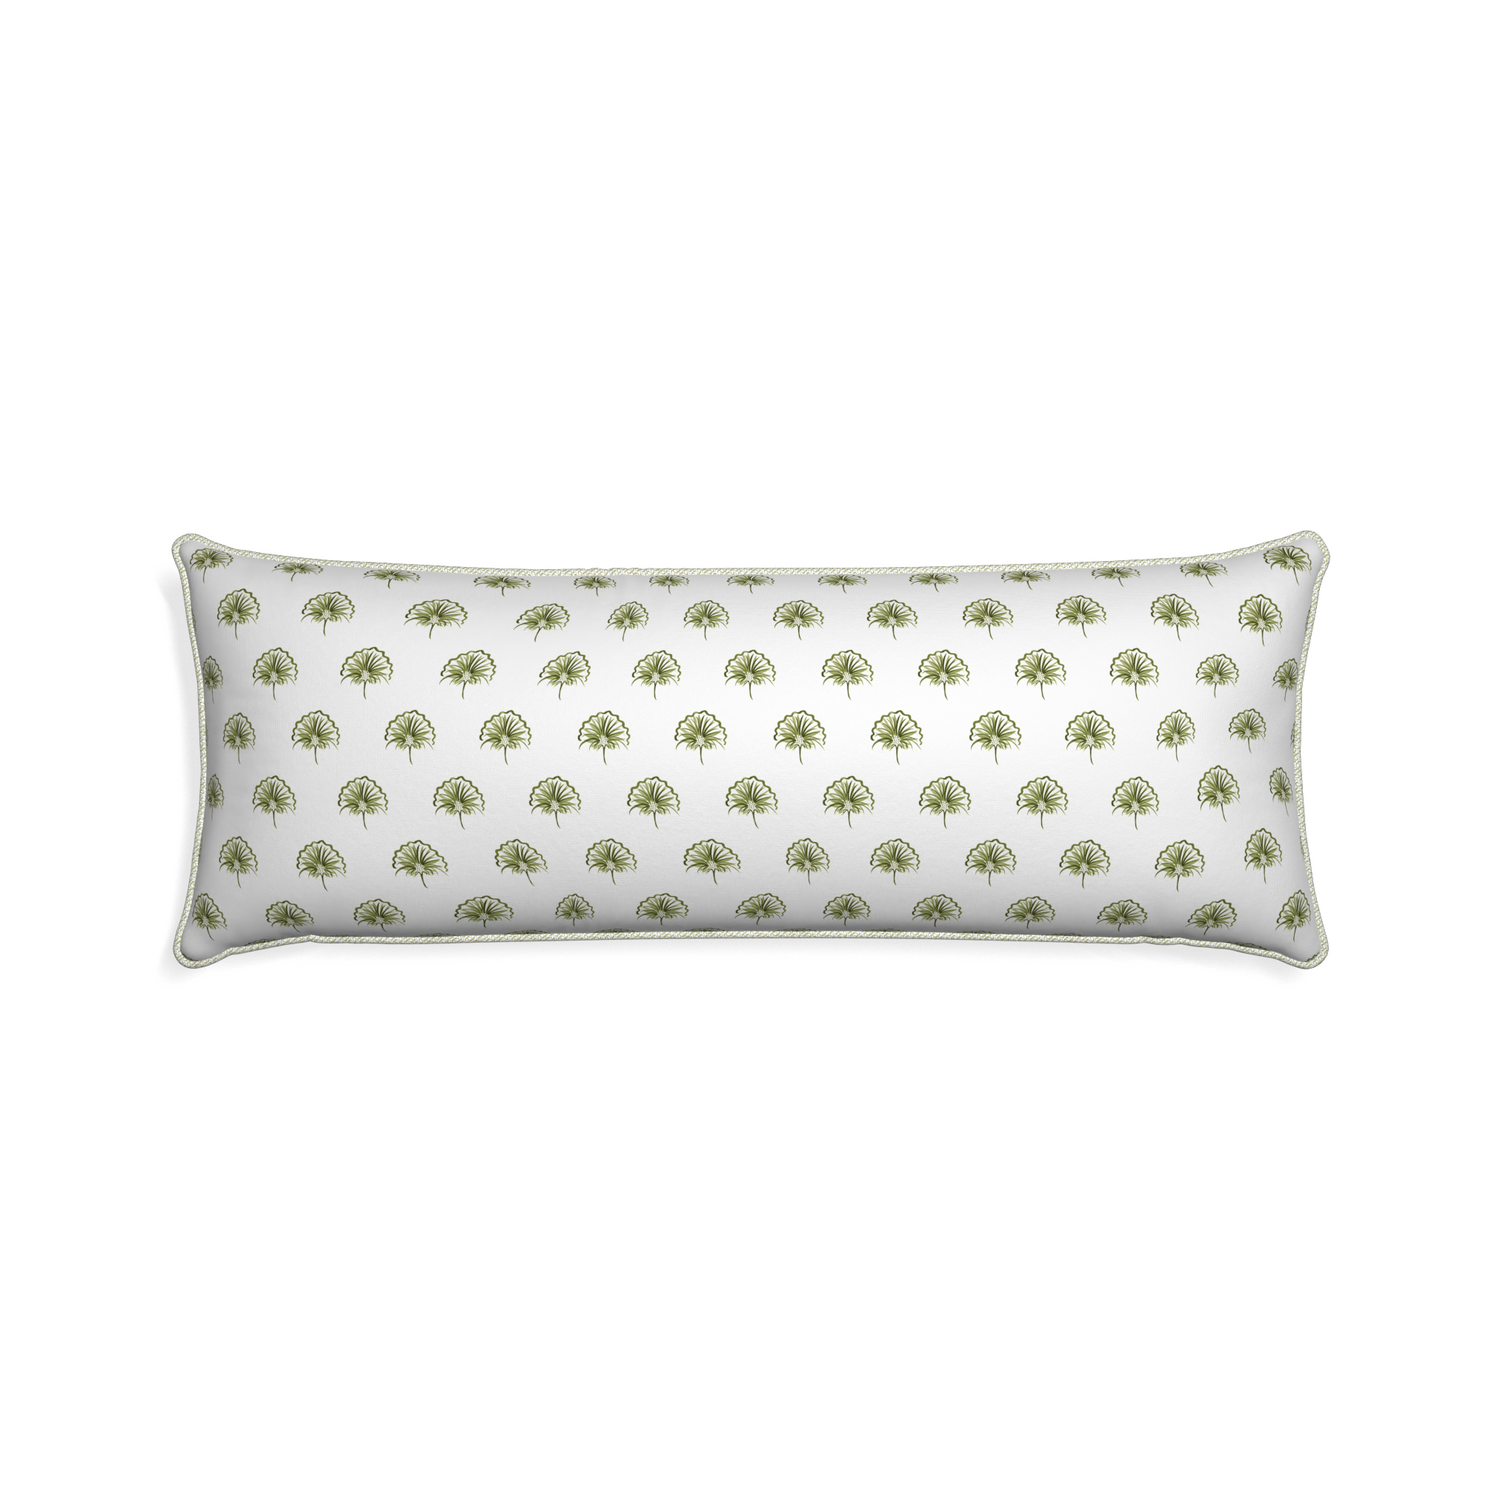 Xl-lumbar penelope moss custom pillow with l piping on white background